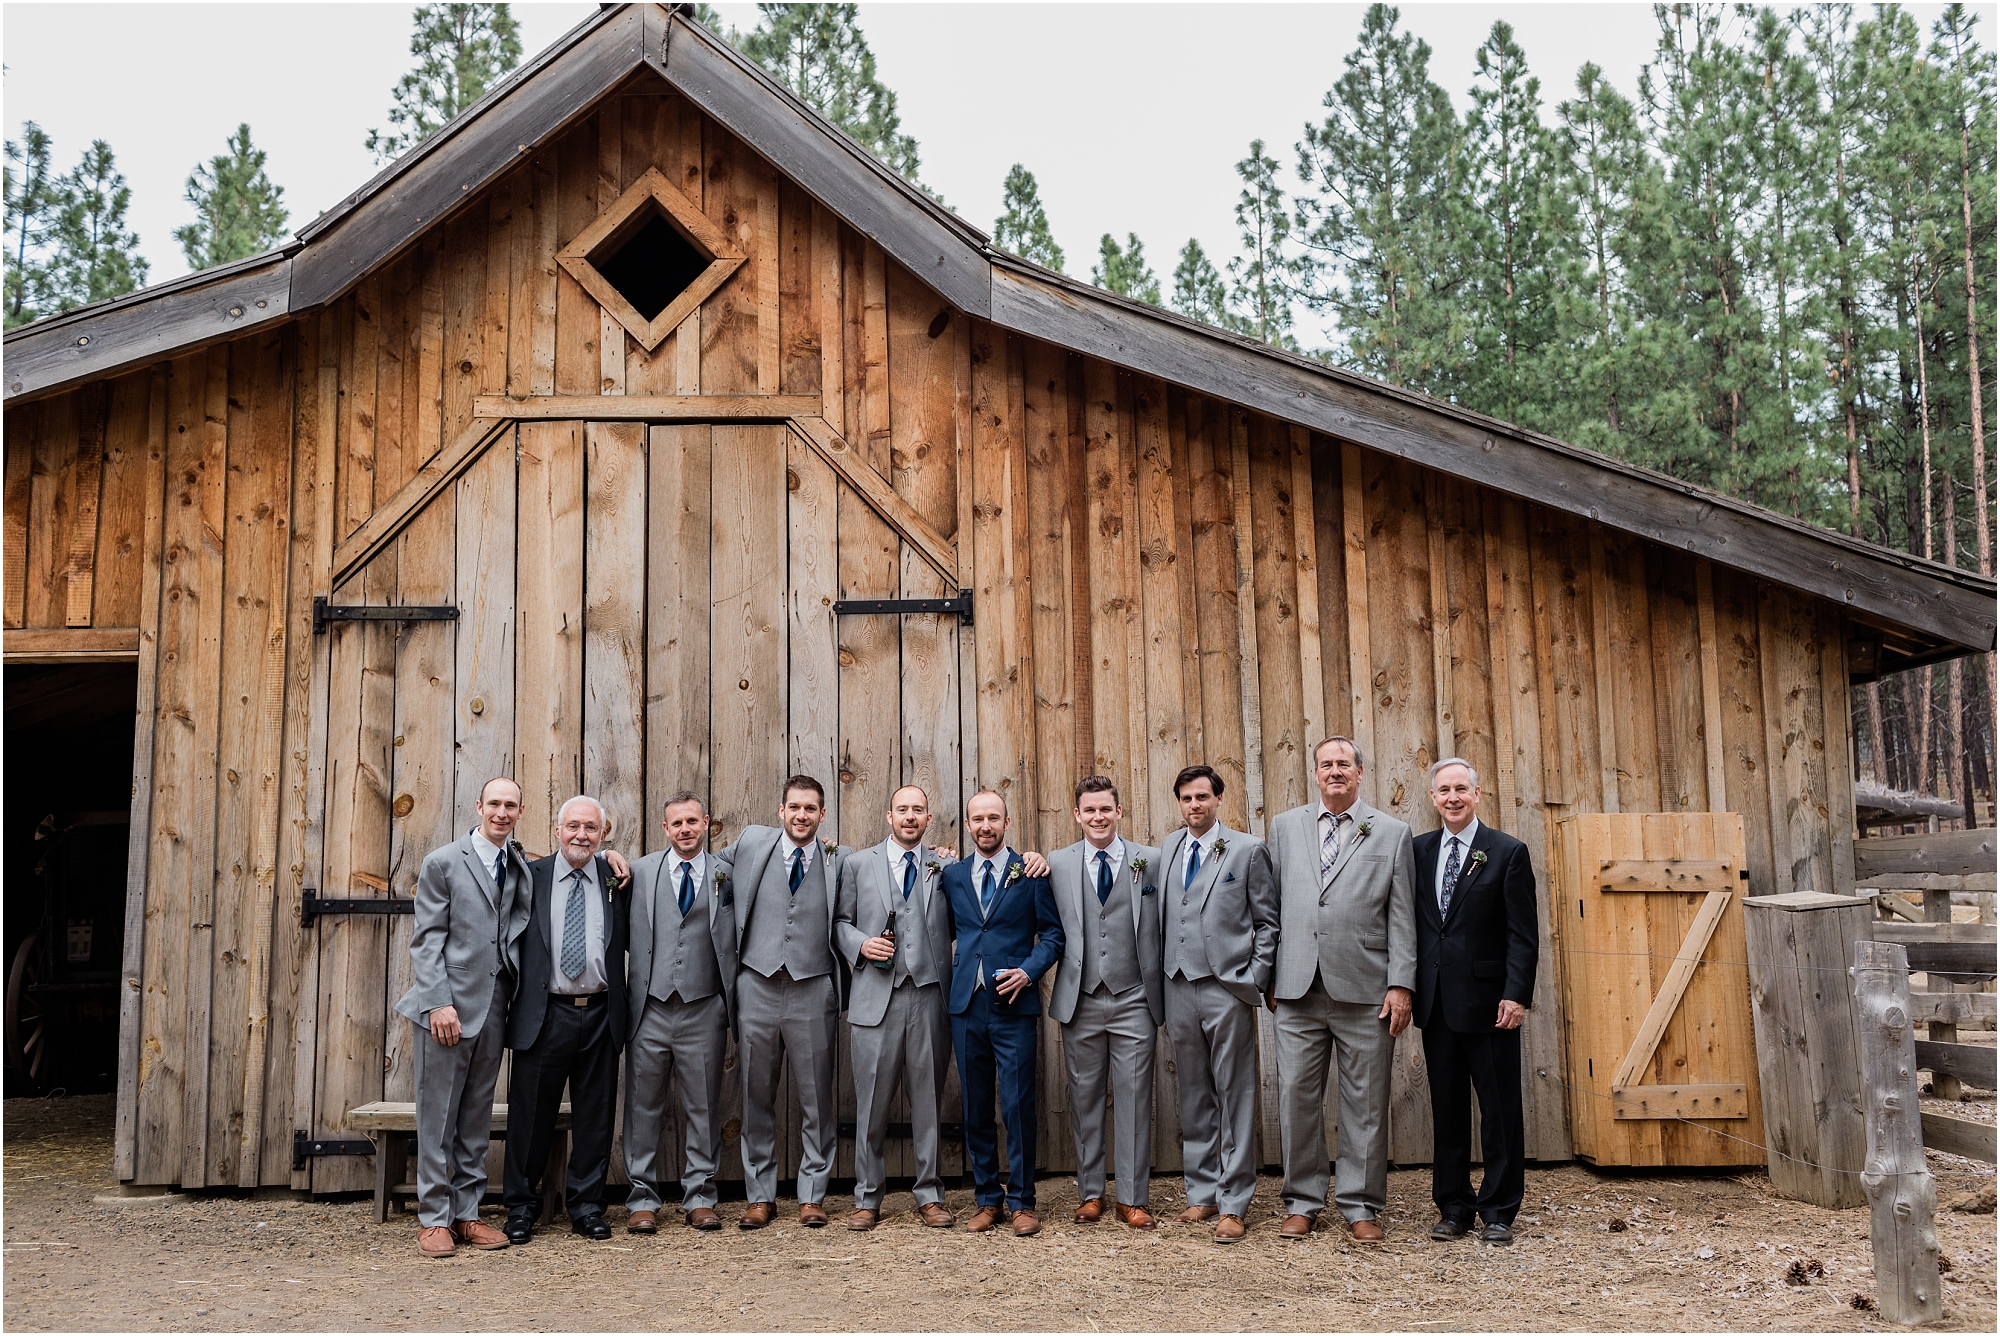 All the guys in the wedding party and family pose outside the horse stable at this High Desert Museum homestead wedding in Bend, OR. | Erica Swantek Photography